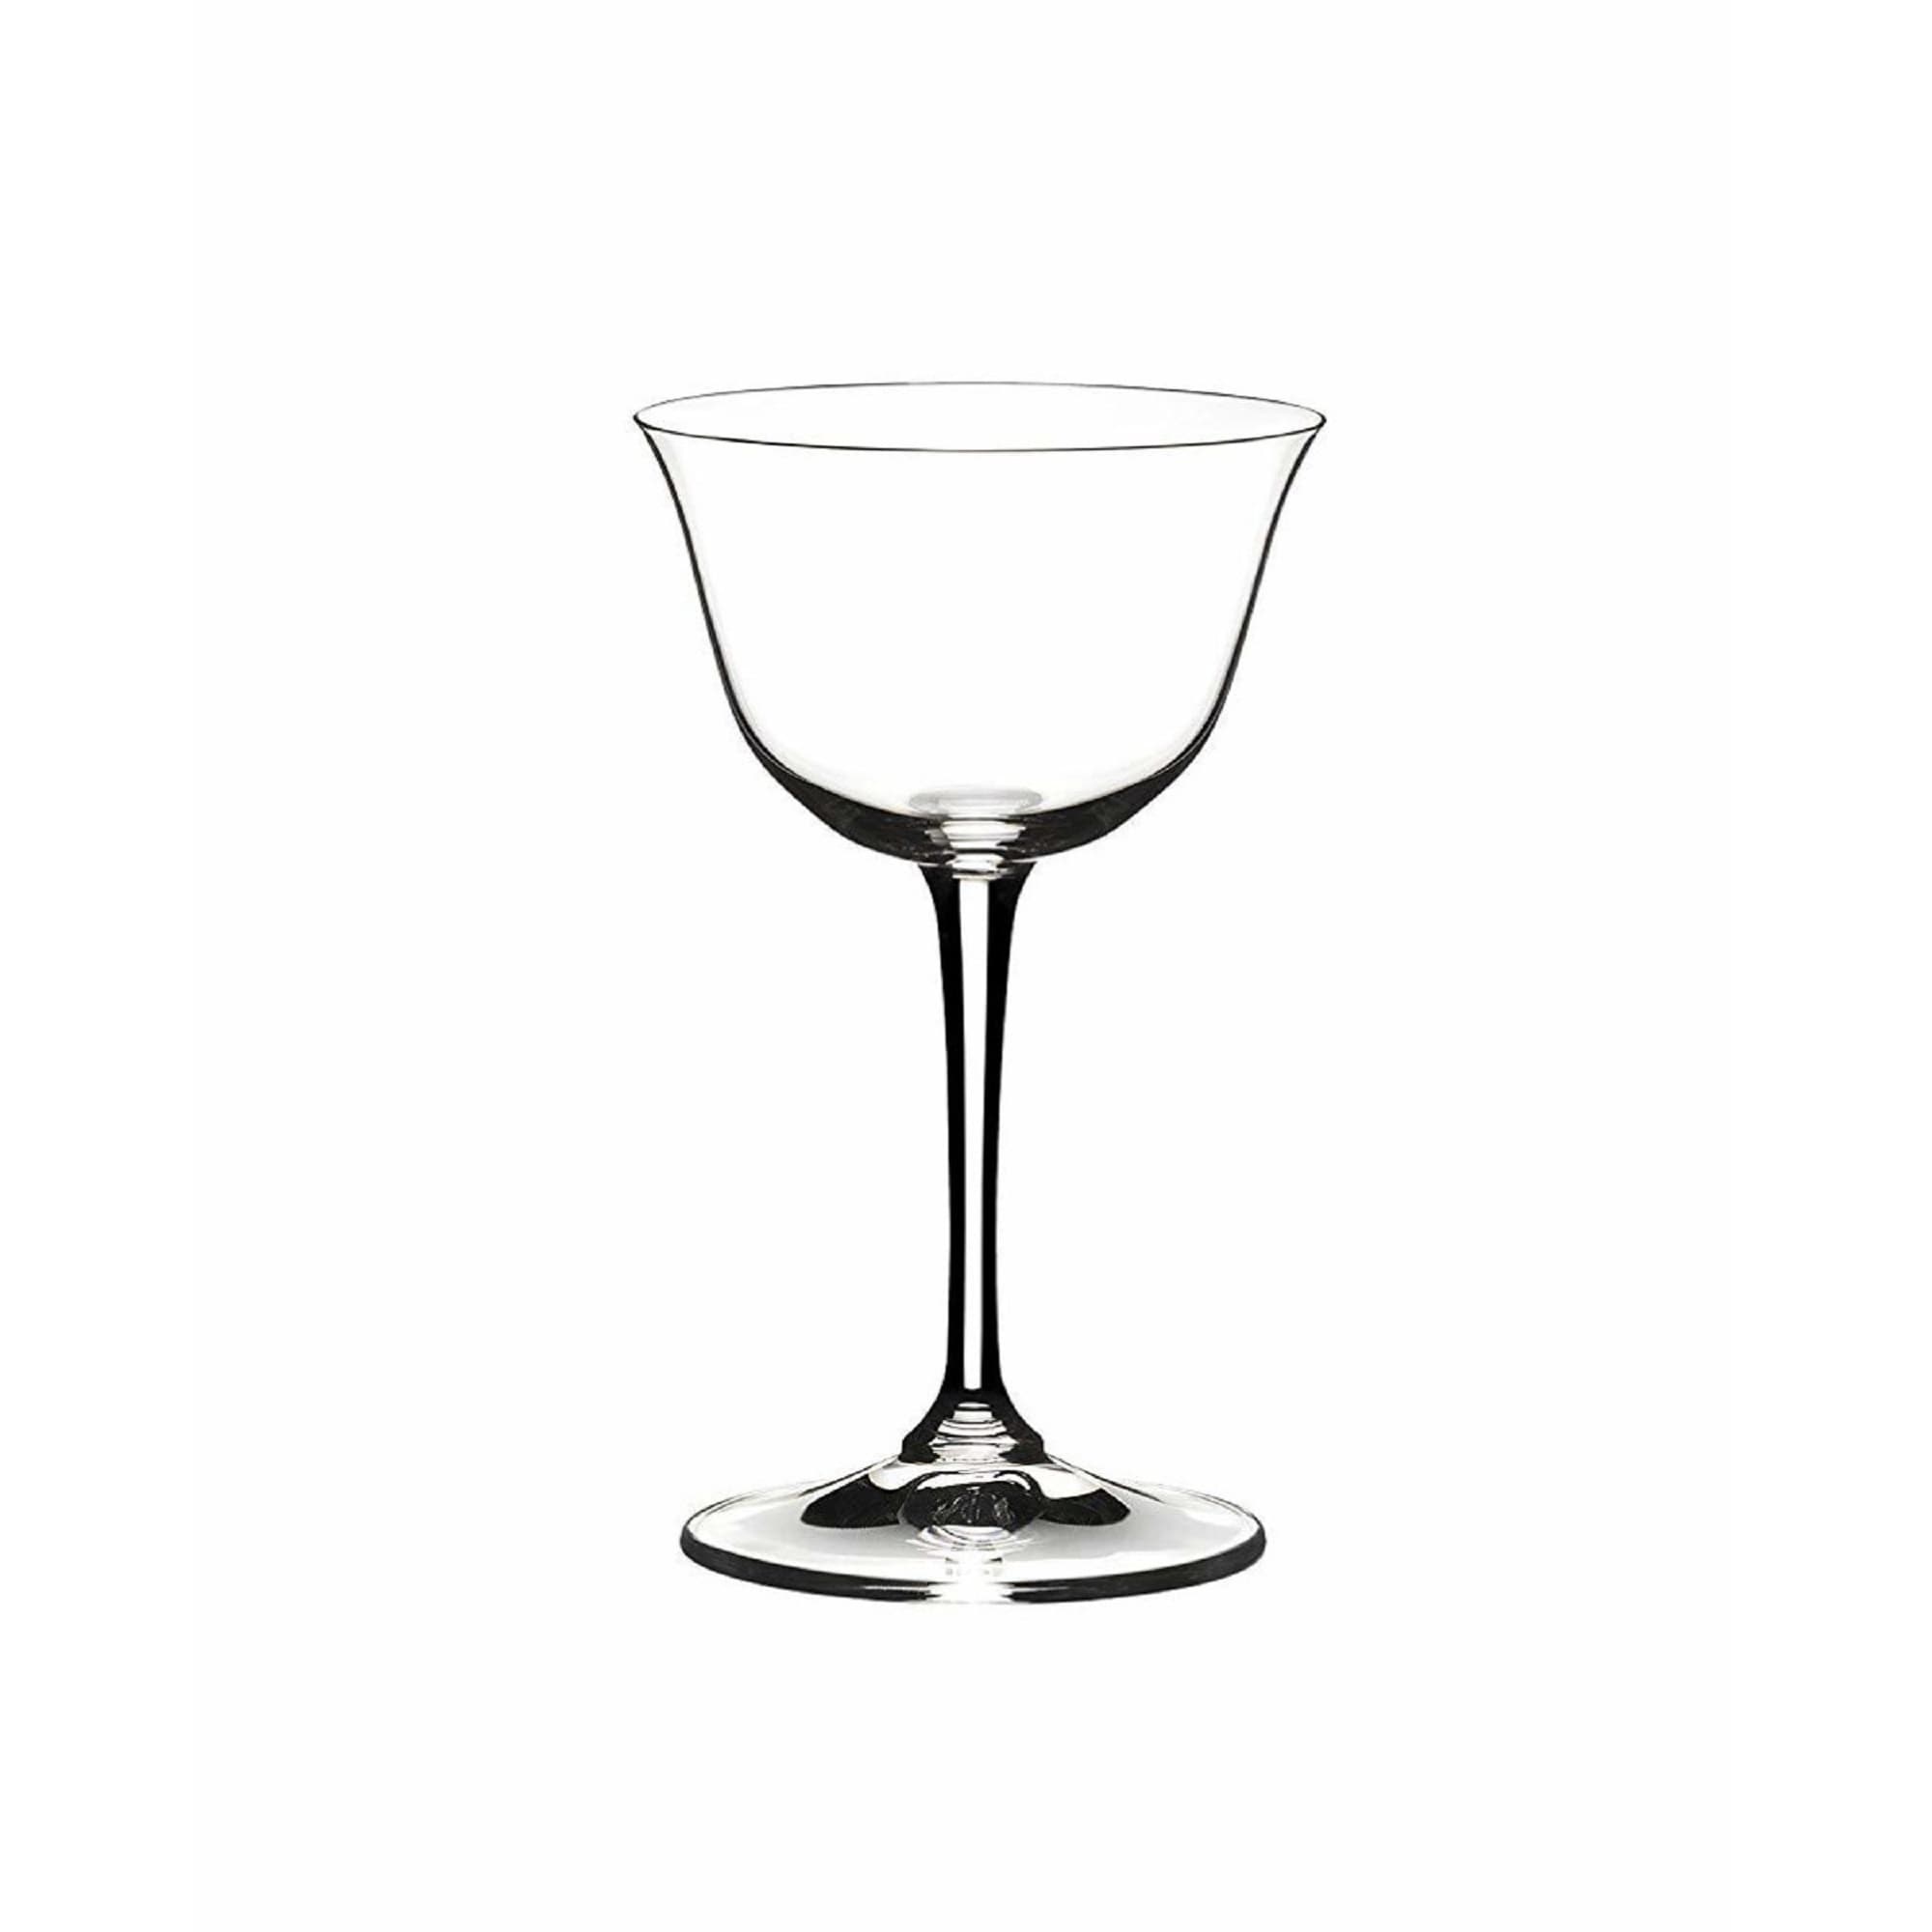 https://ak1.ostkcdn.com/images/products/is/images/direct/f2f797a8283668fcfb0989f554fe9b545cea5a15/Riedel-Drink-Specific-Glassware-Sour-Cocktail-Glass-%287-oz%2C-Clear%29.jpg